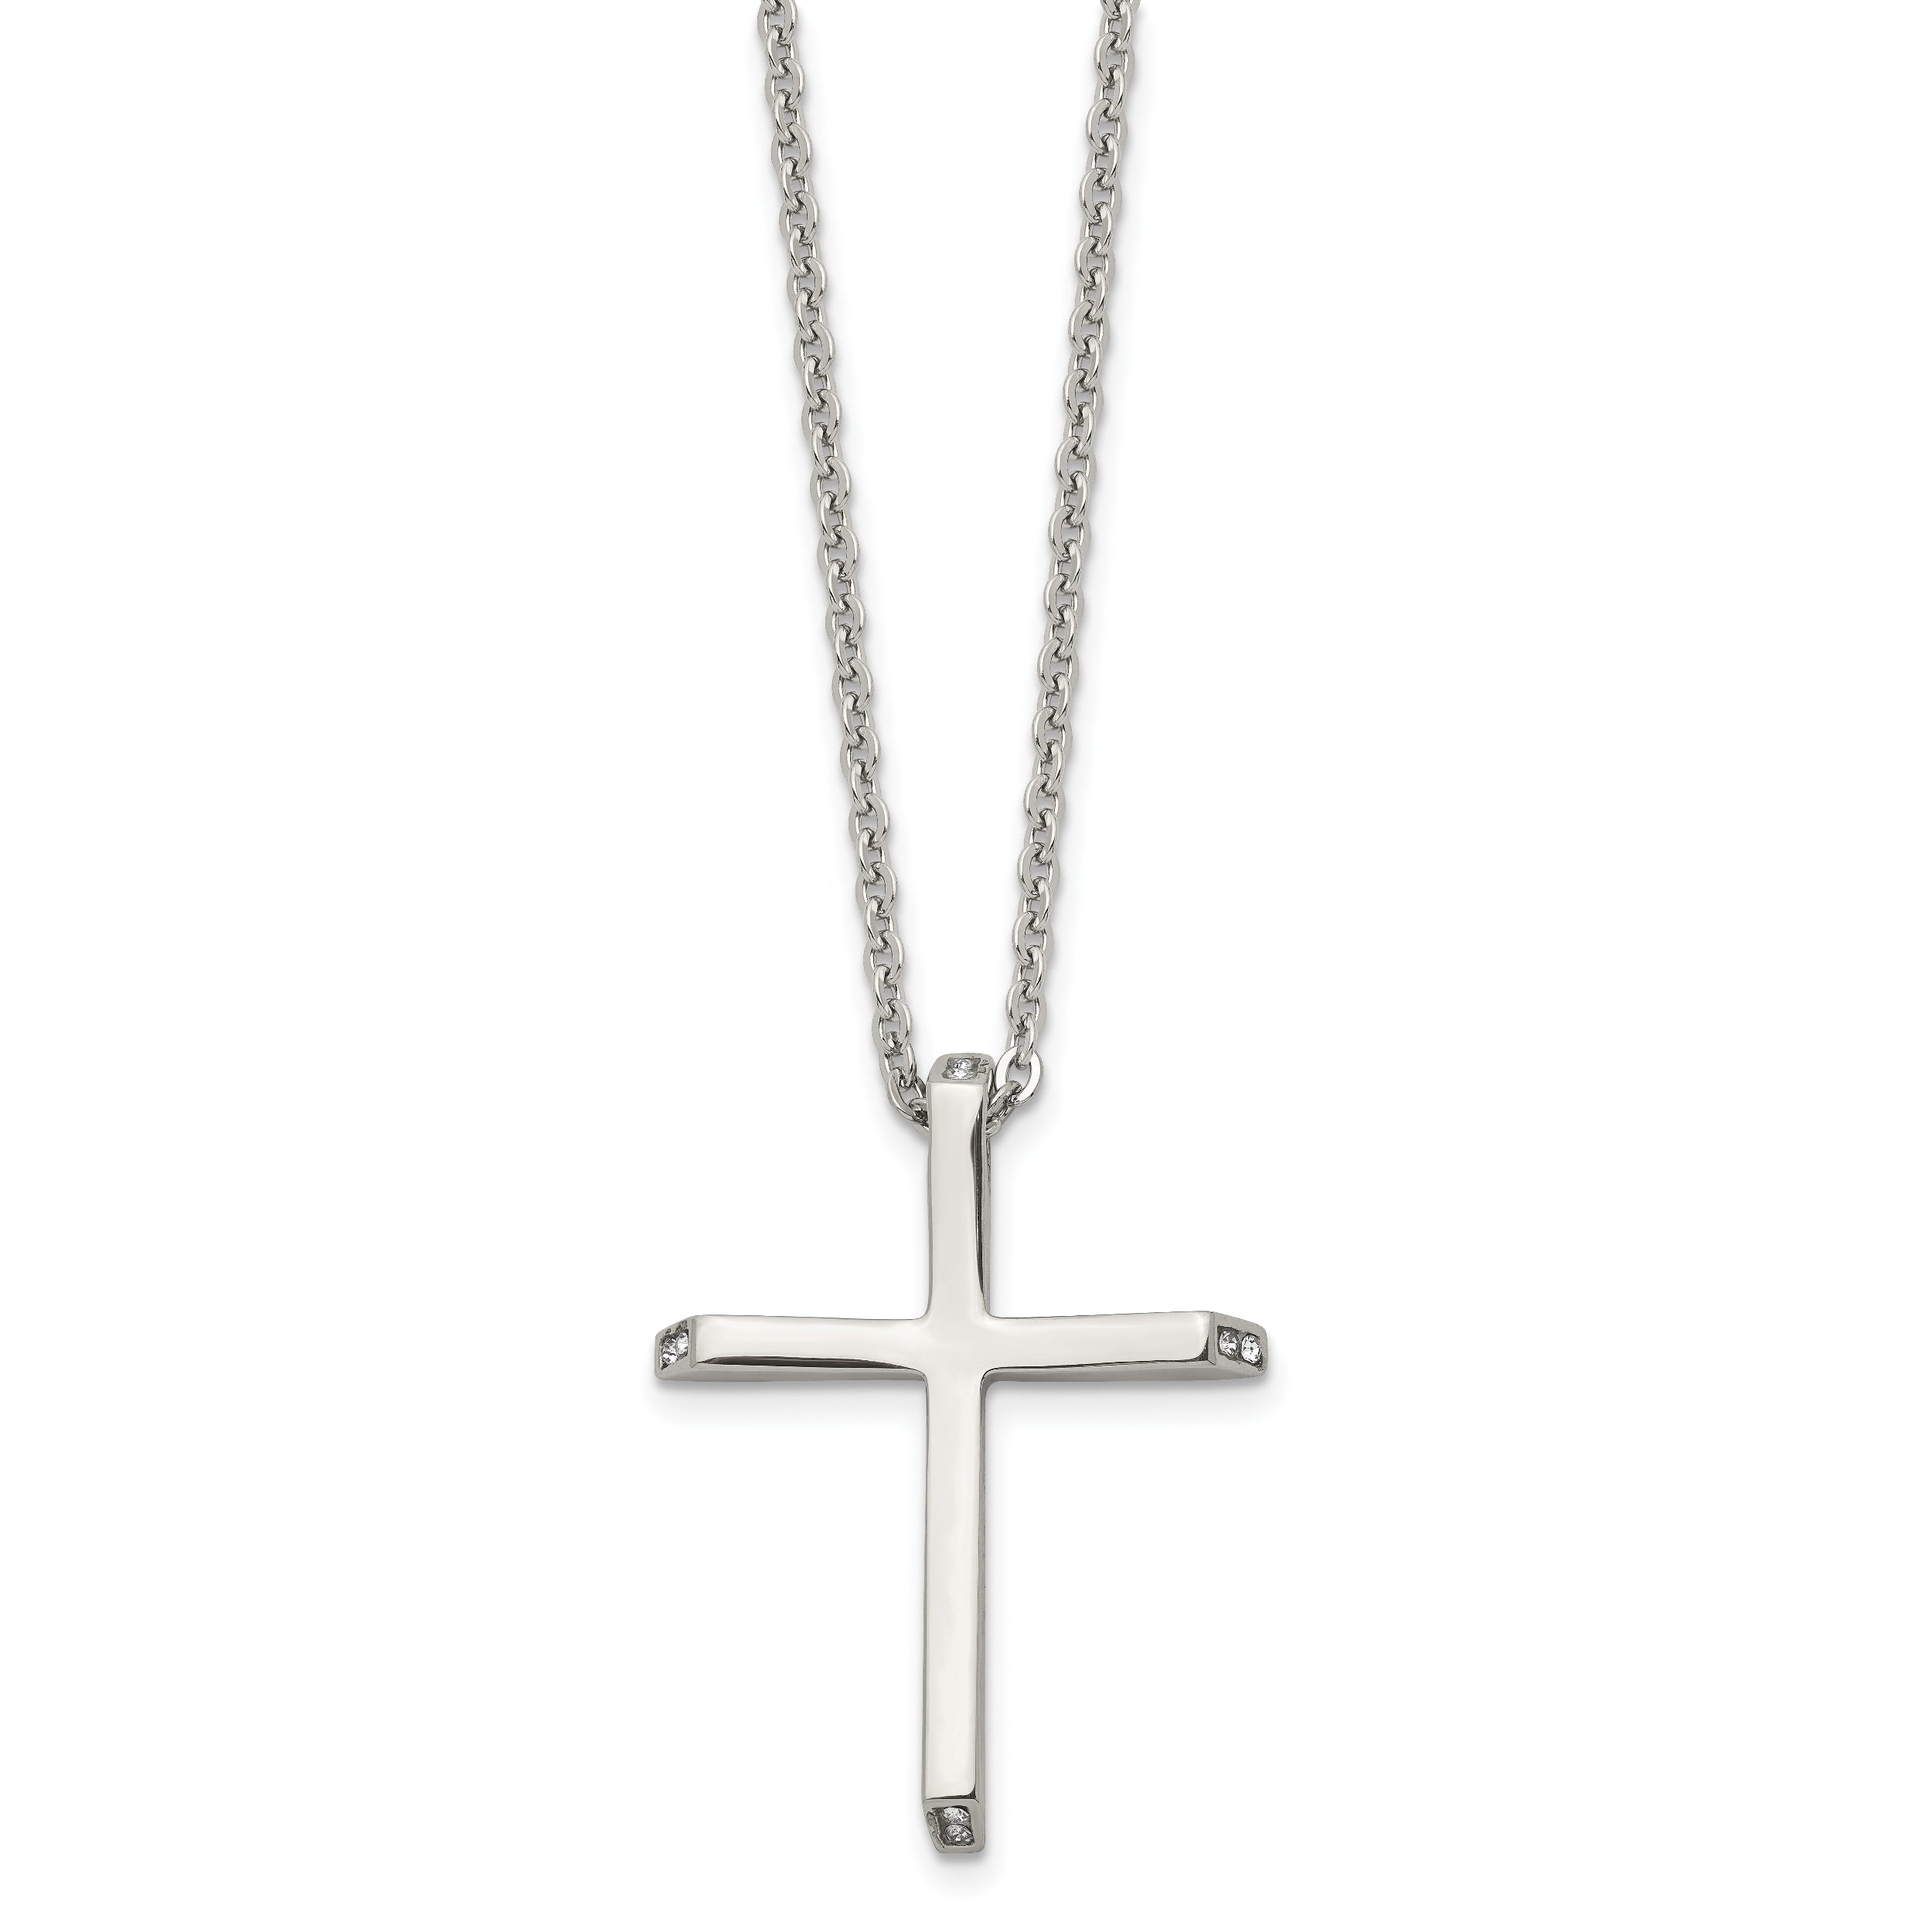 Chisel Stainless Steel Polished with CZ Ends Cross Pendant on a 22 inch Cable Chain Necklace